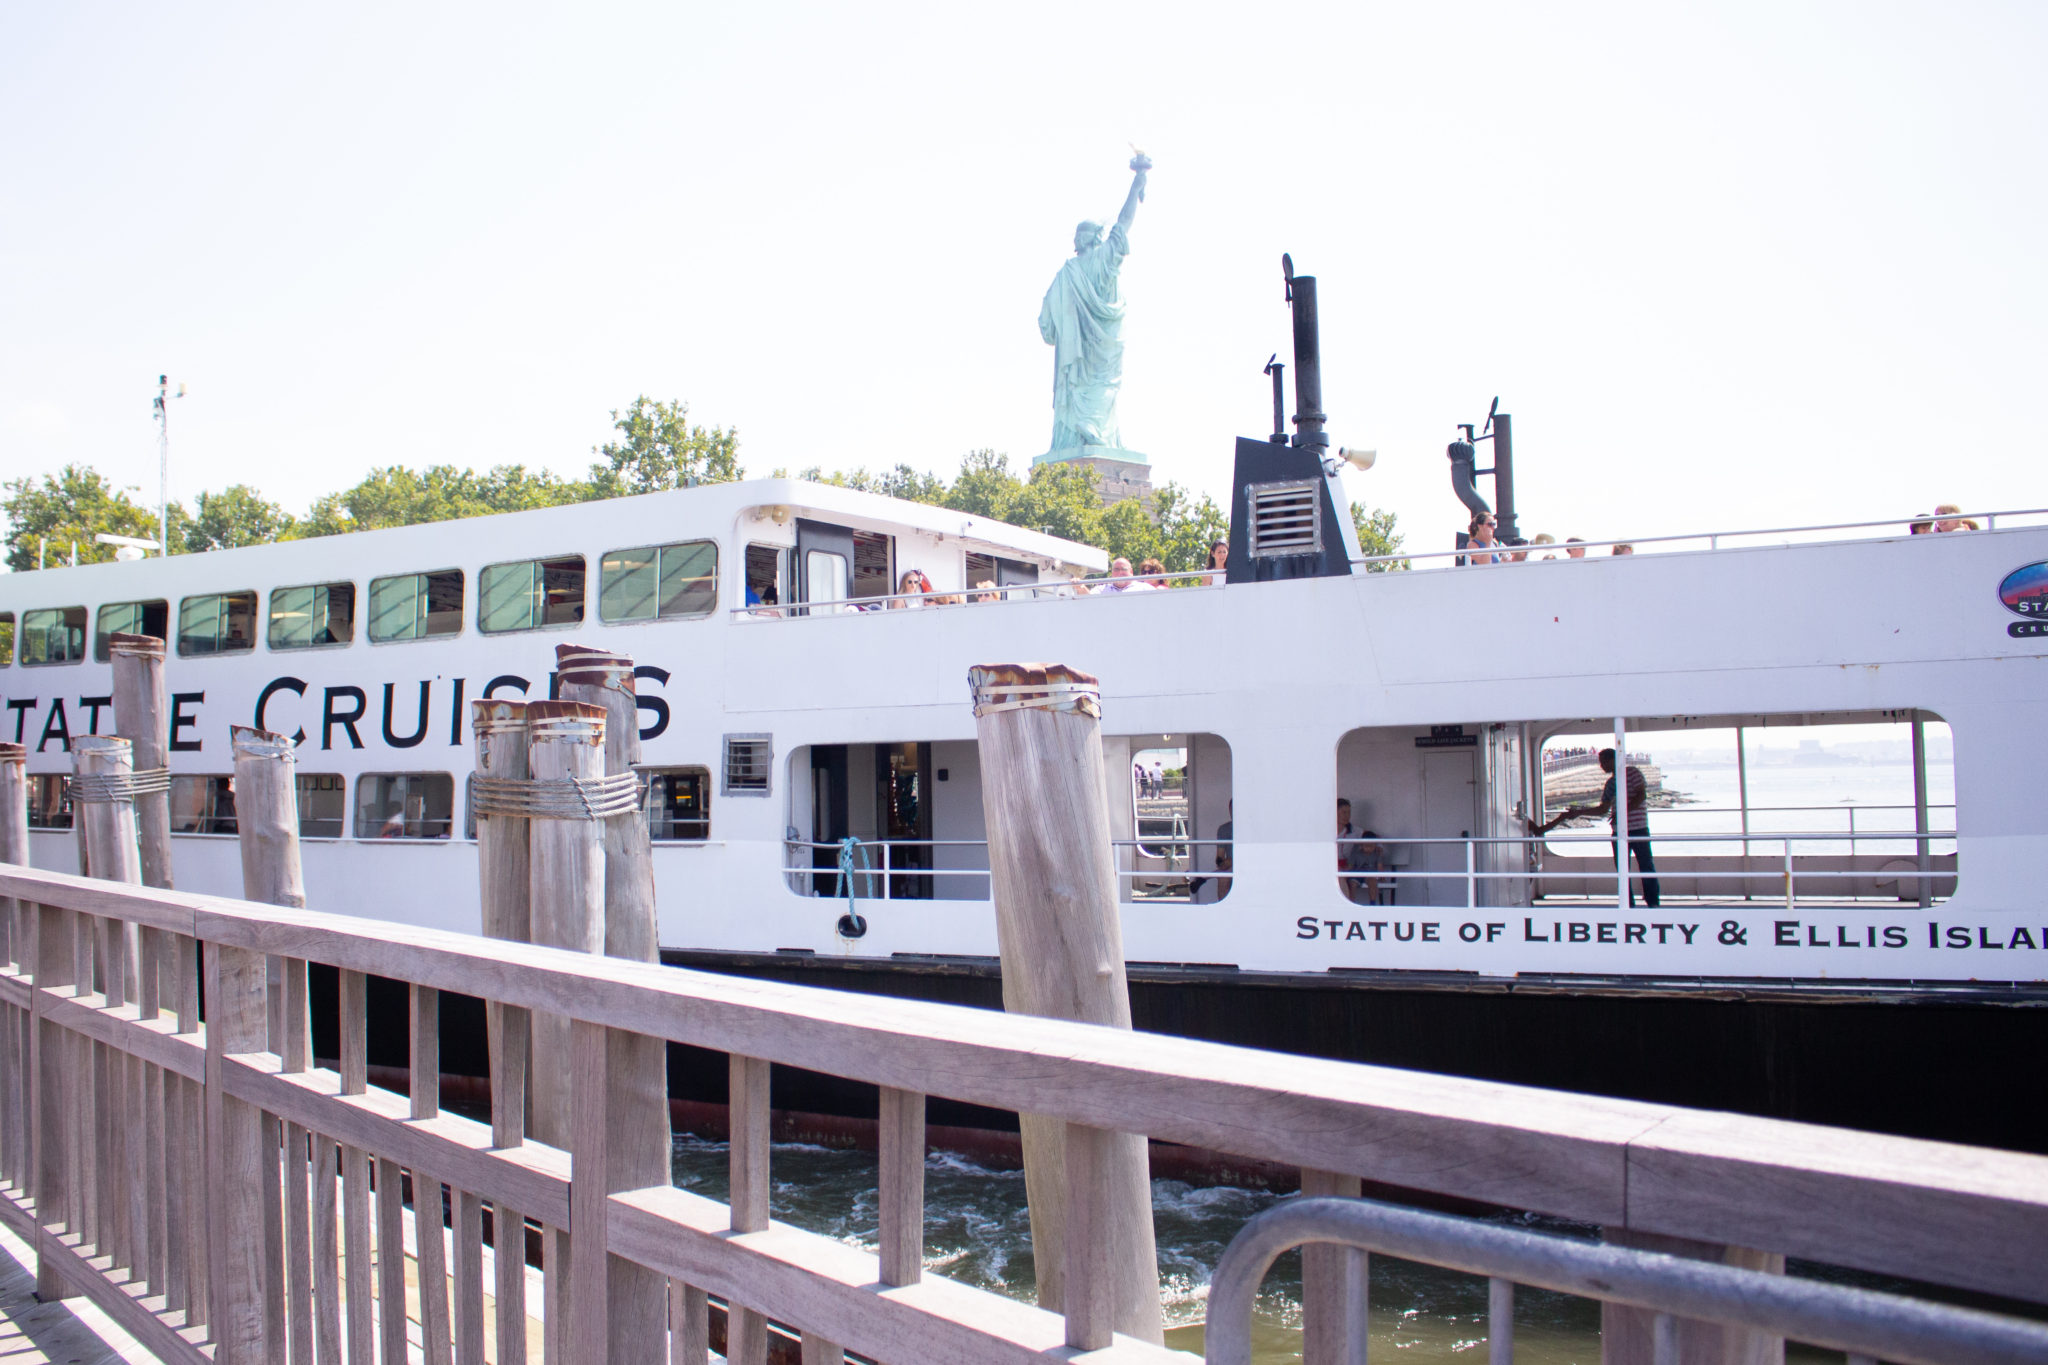 5 Tips For Visiting The Statue Of Liberty